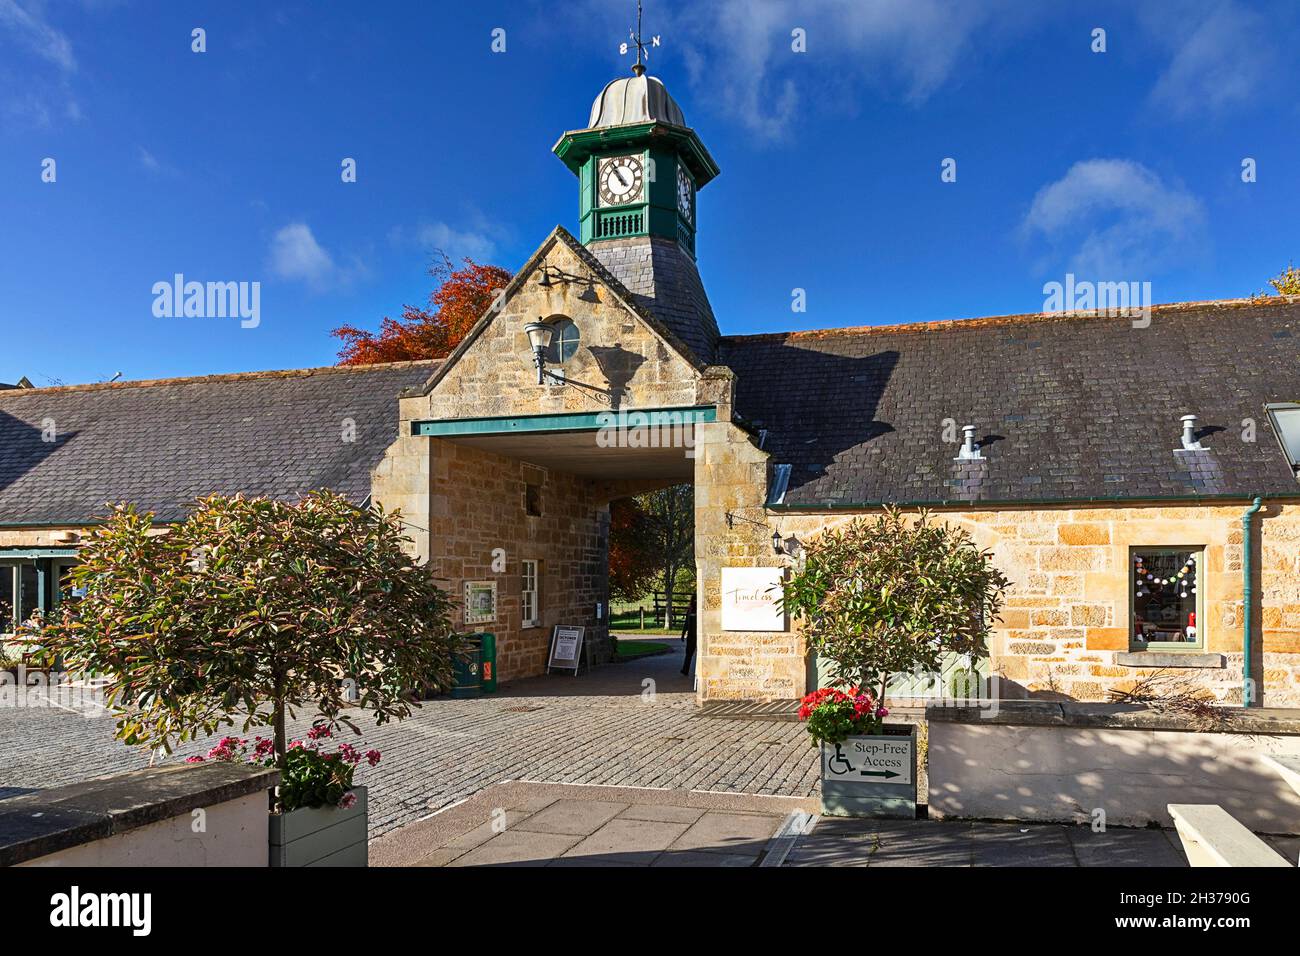 LOGIE STEADING FORRES MORAY SCOTLAND THE COURTYARD AND ENTRANCE UNDER THE CLOCK TOWER Stock Photo